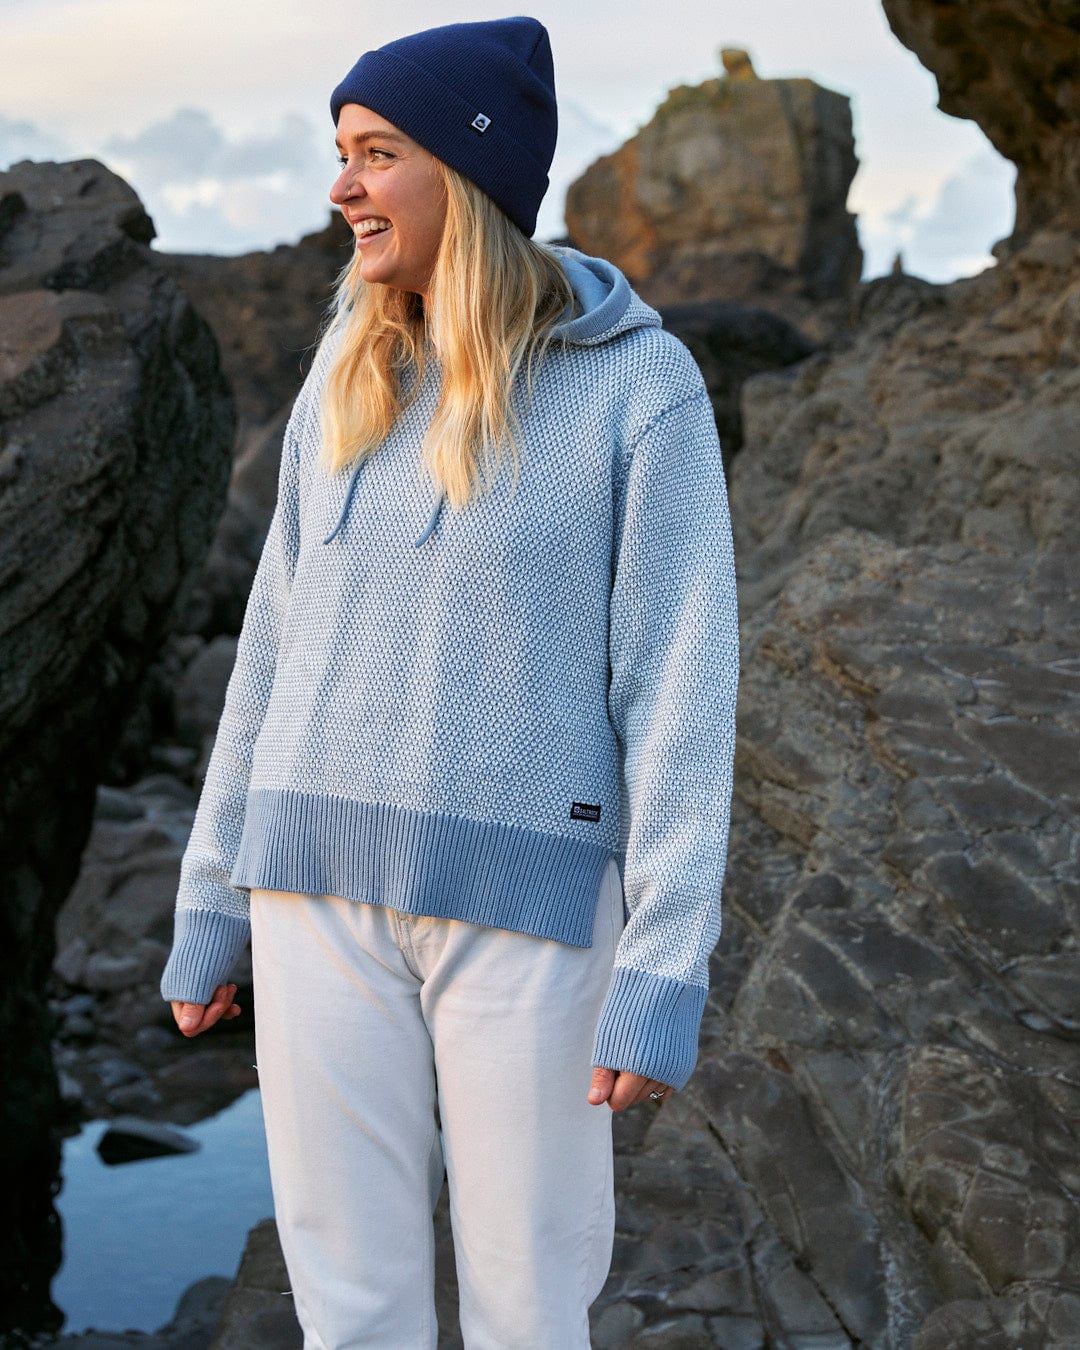 A woman smiling in front of the Poppy - Womens Knitted Pop Hoodie - Blue by Saltrock.